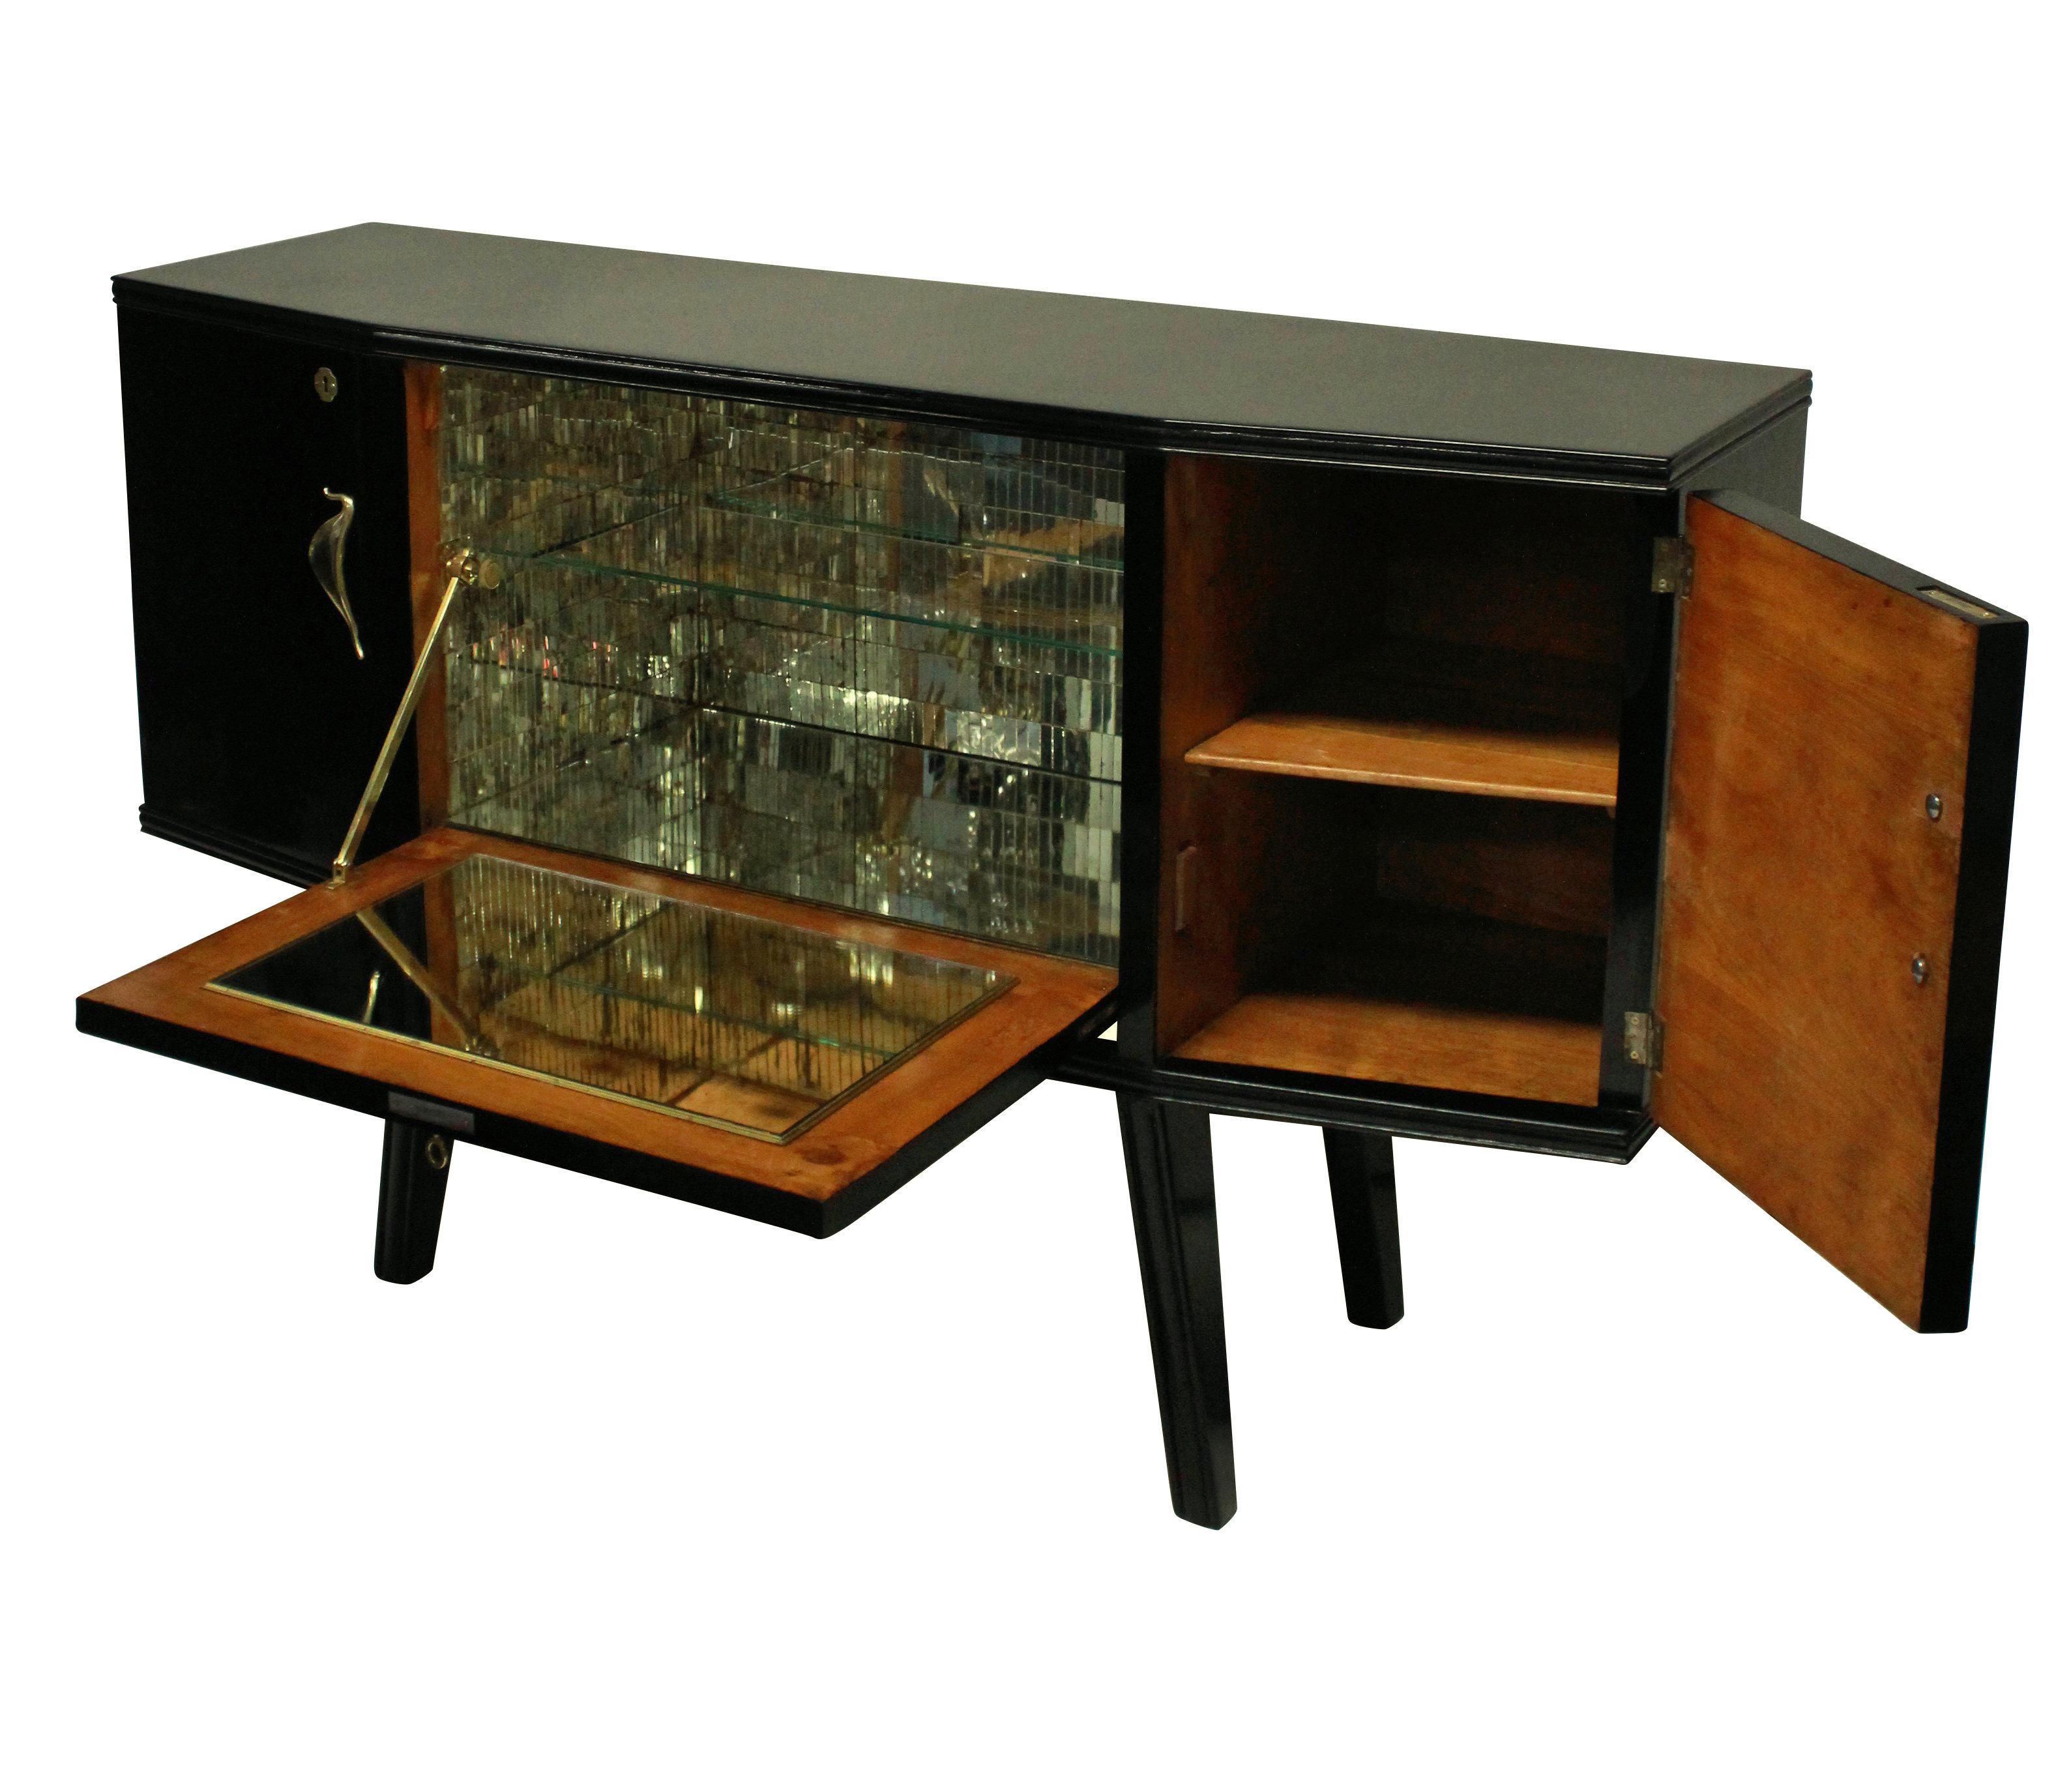 A stylish Italian bar credenza of interesting angular design in black lacquer with sapele wood interior, with brass hardware and a faux malachite central panel and mirrored interior.

 